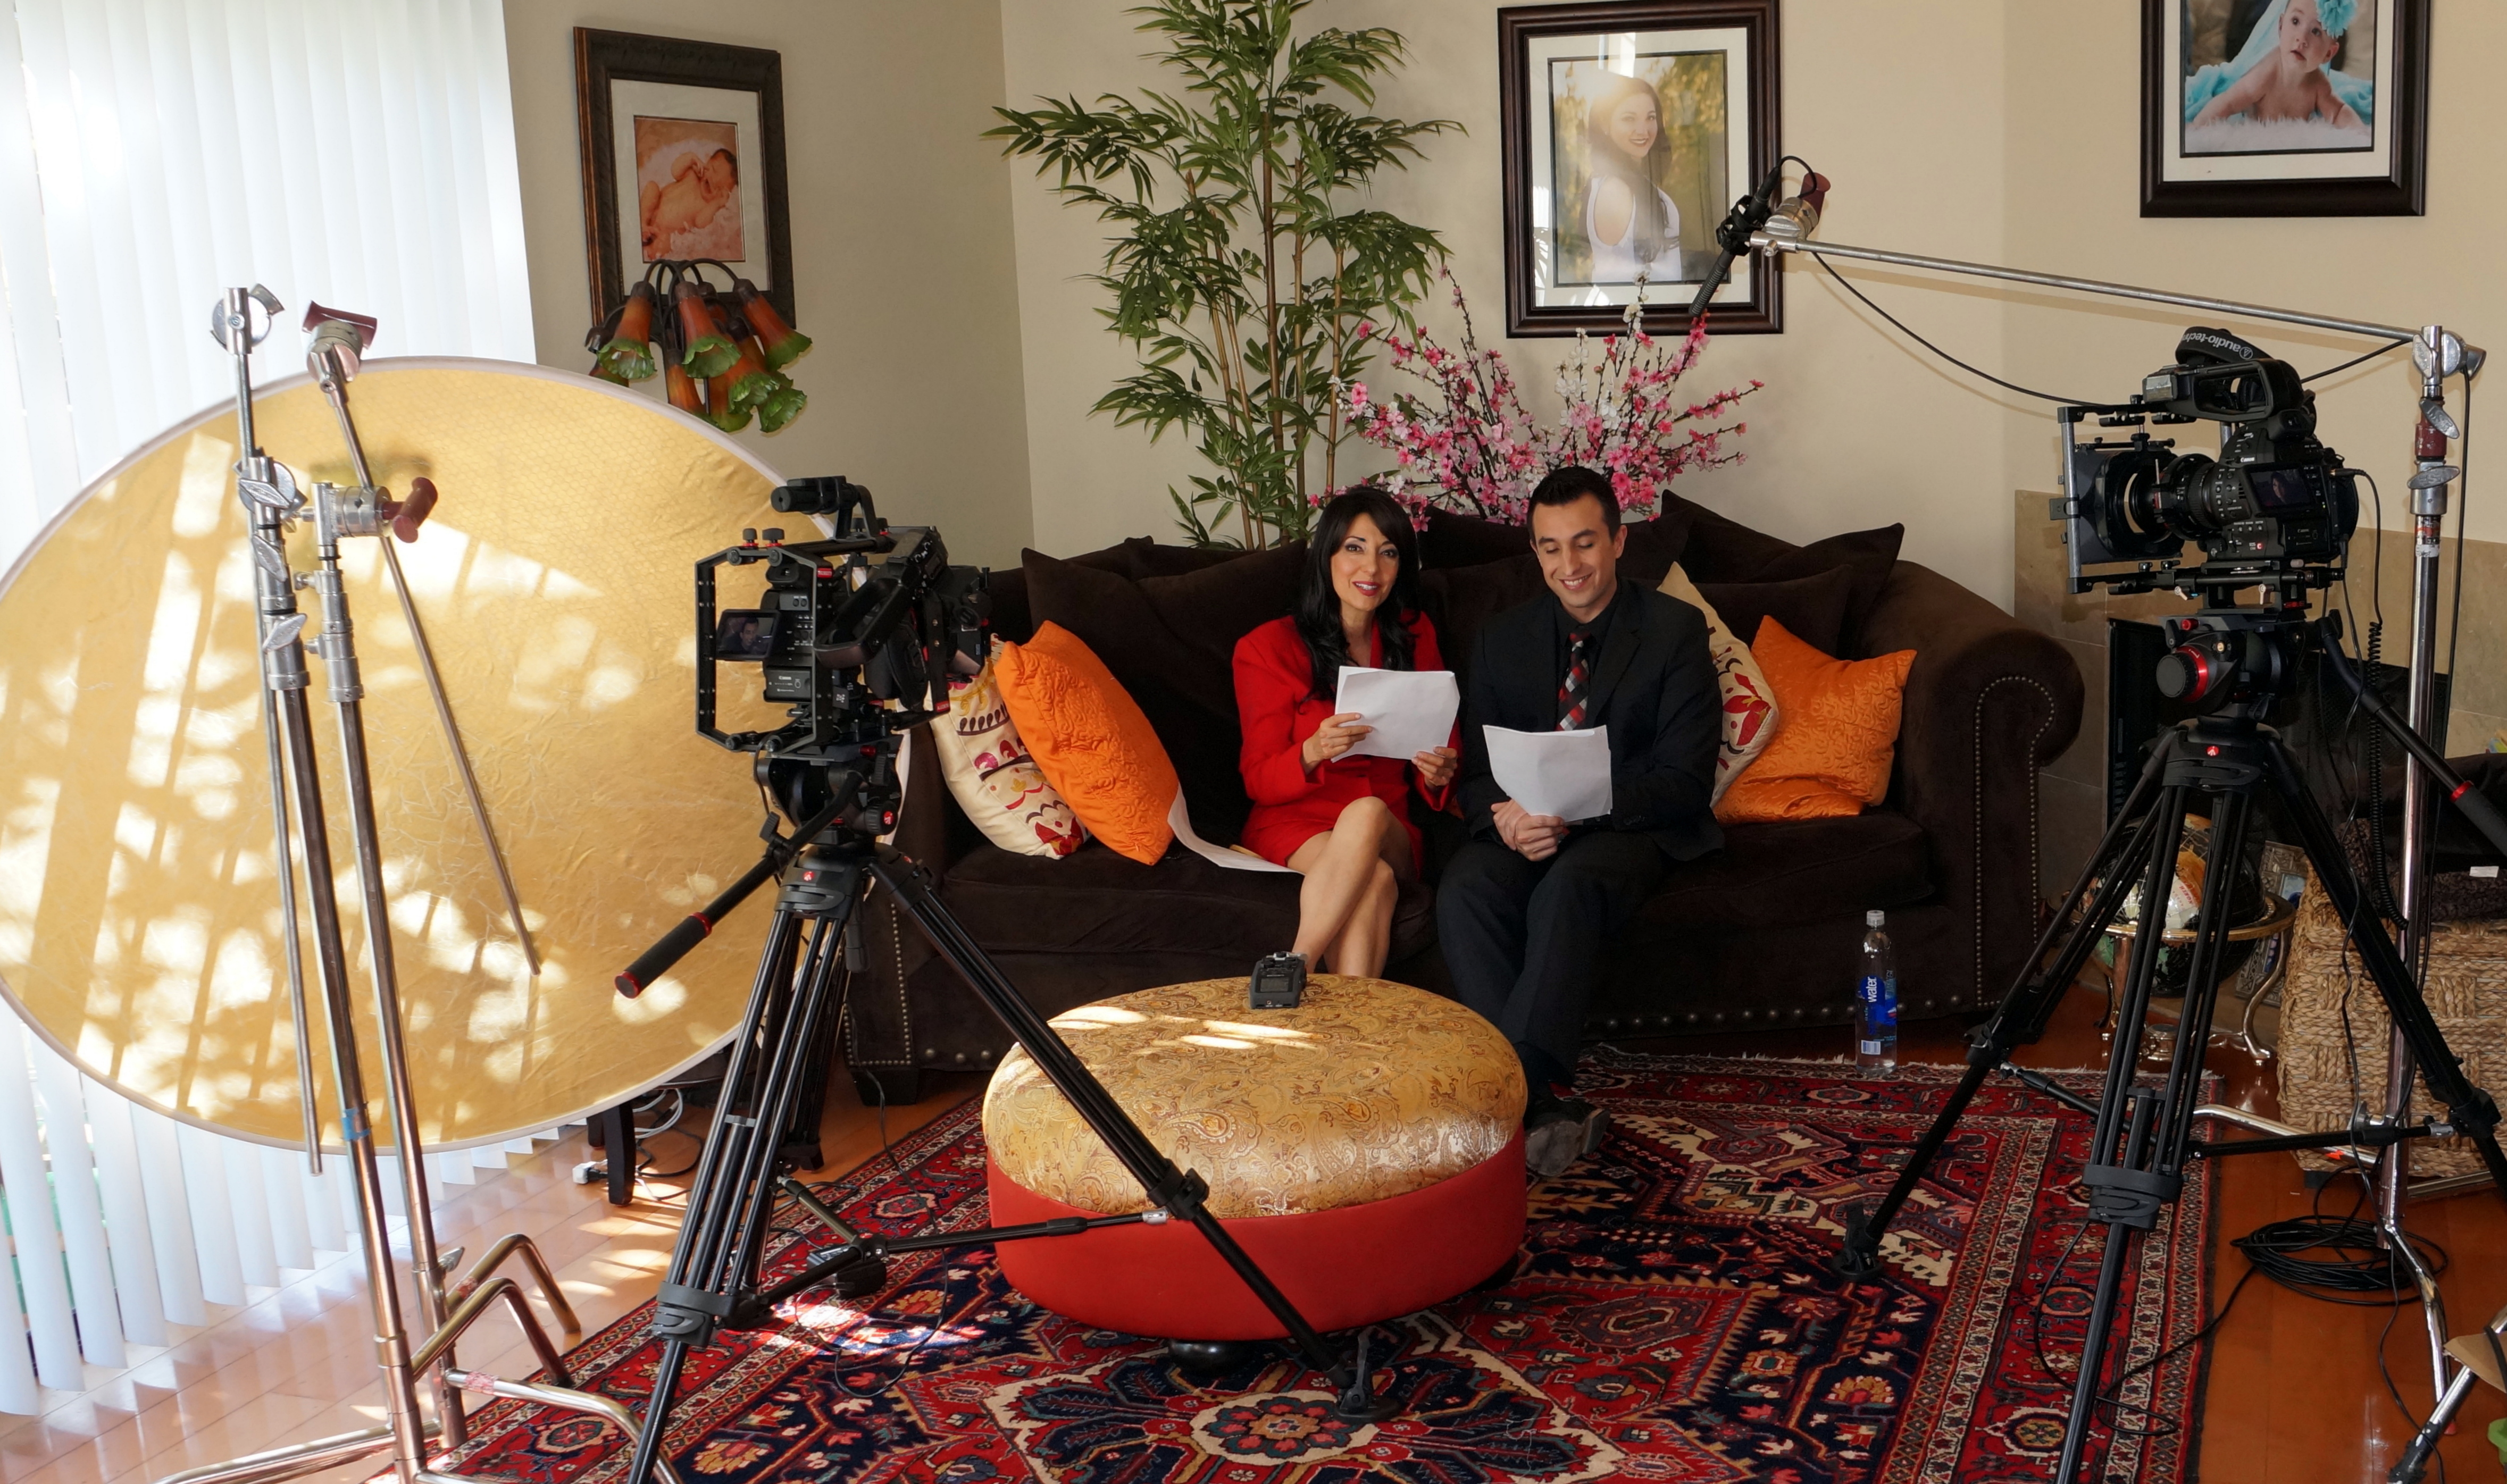 Production still of the TV show Dr. Luciana on Aging and Falling with orthopedic surgeon Dr. Arash Taheri, 2/1/15